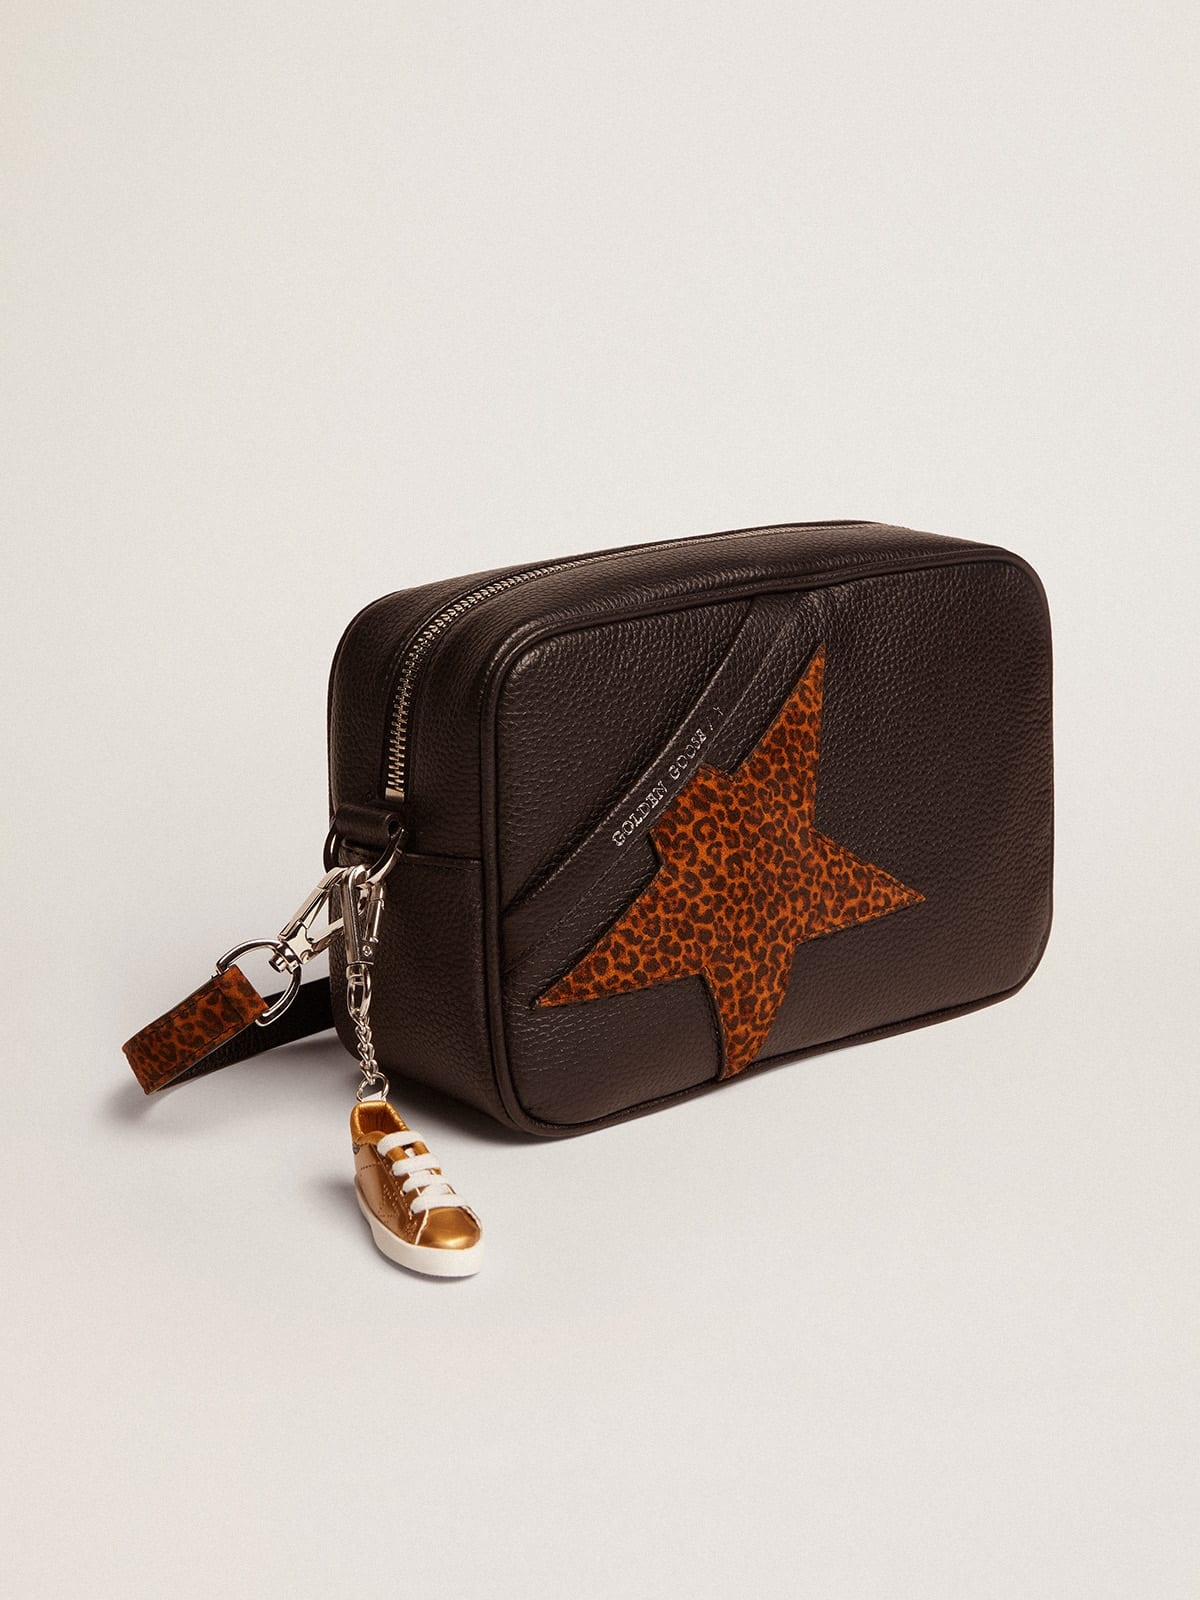 Star Bag in dark brown leather with leopard-print suede star - 5